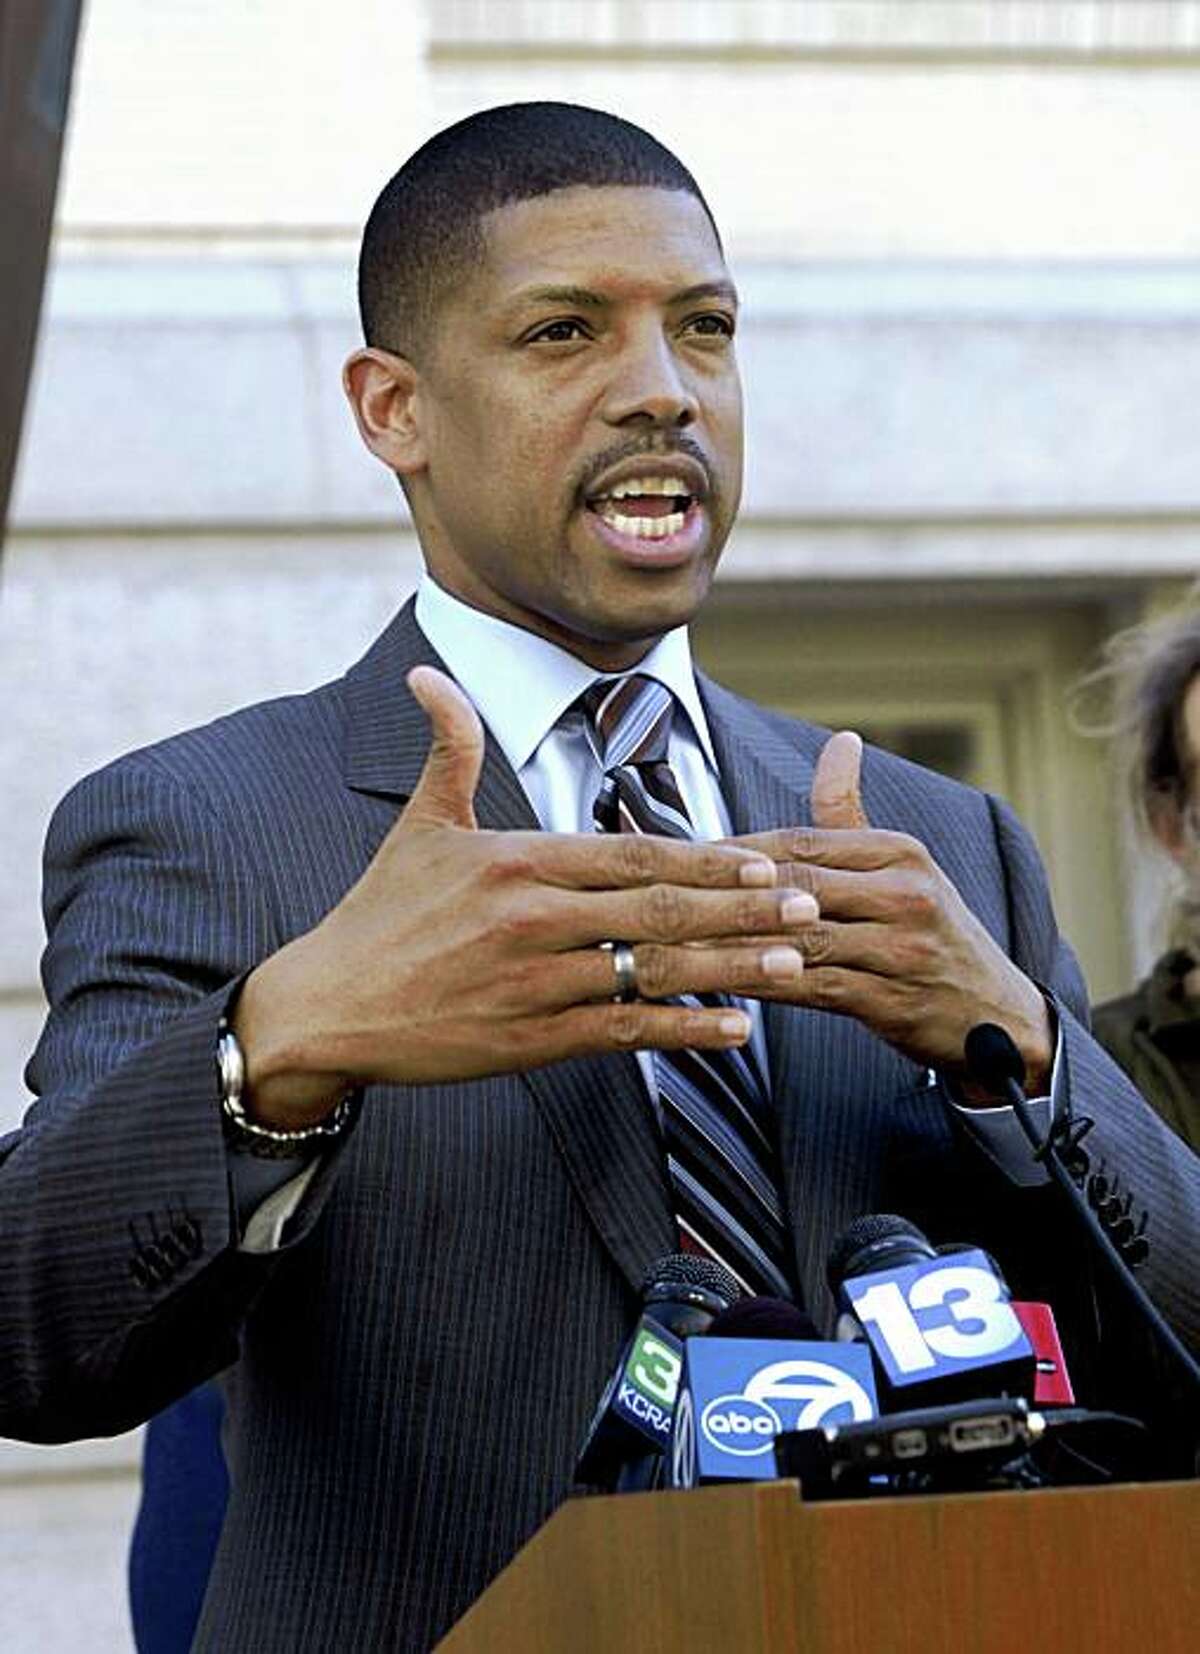 Sacramento Mayor Kevin Johnson announced that city officials have devised a temporary plan to offer shelter space and transitional housing to the estimated 150 homeless living in what has become known as "Tent City," during a news conference in Sacramento, Calif., Thursday, March 19, 2009. Johnson said he will take the proposal to the Sacramento City Council for approval on Tuesday.(AP Photo/Rich Pedroncelli)